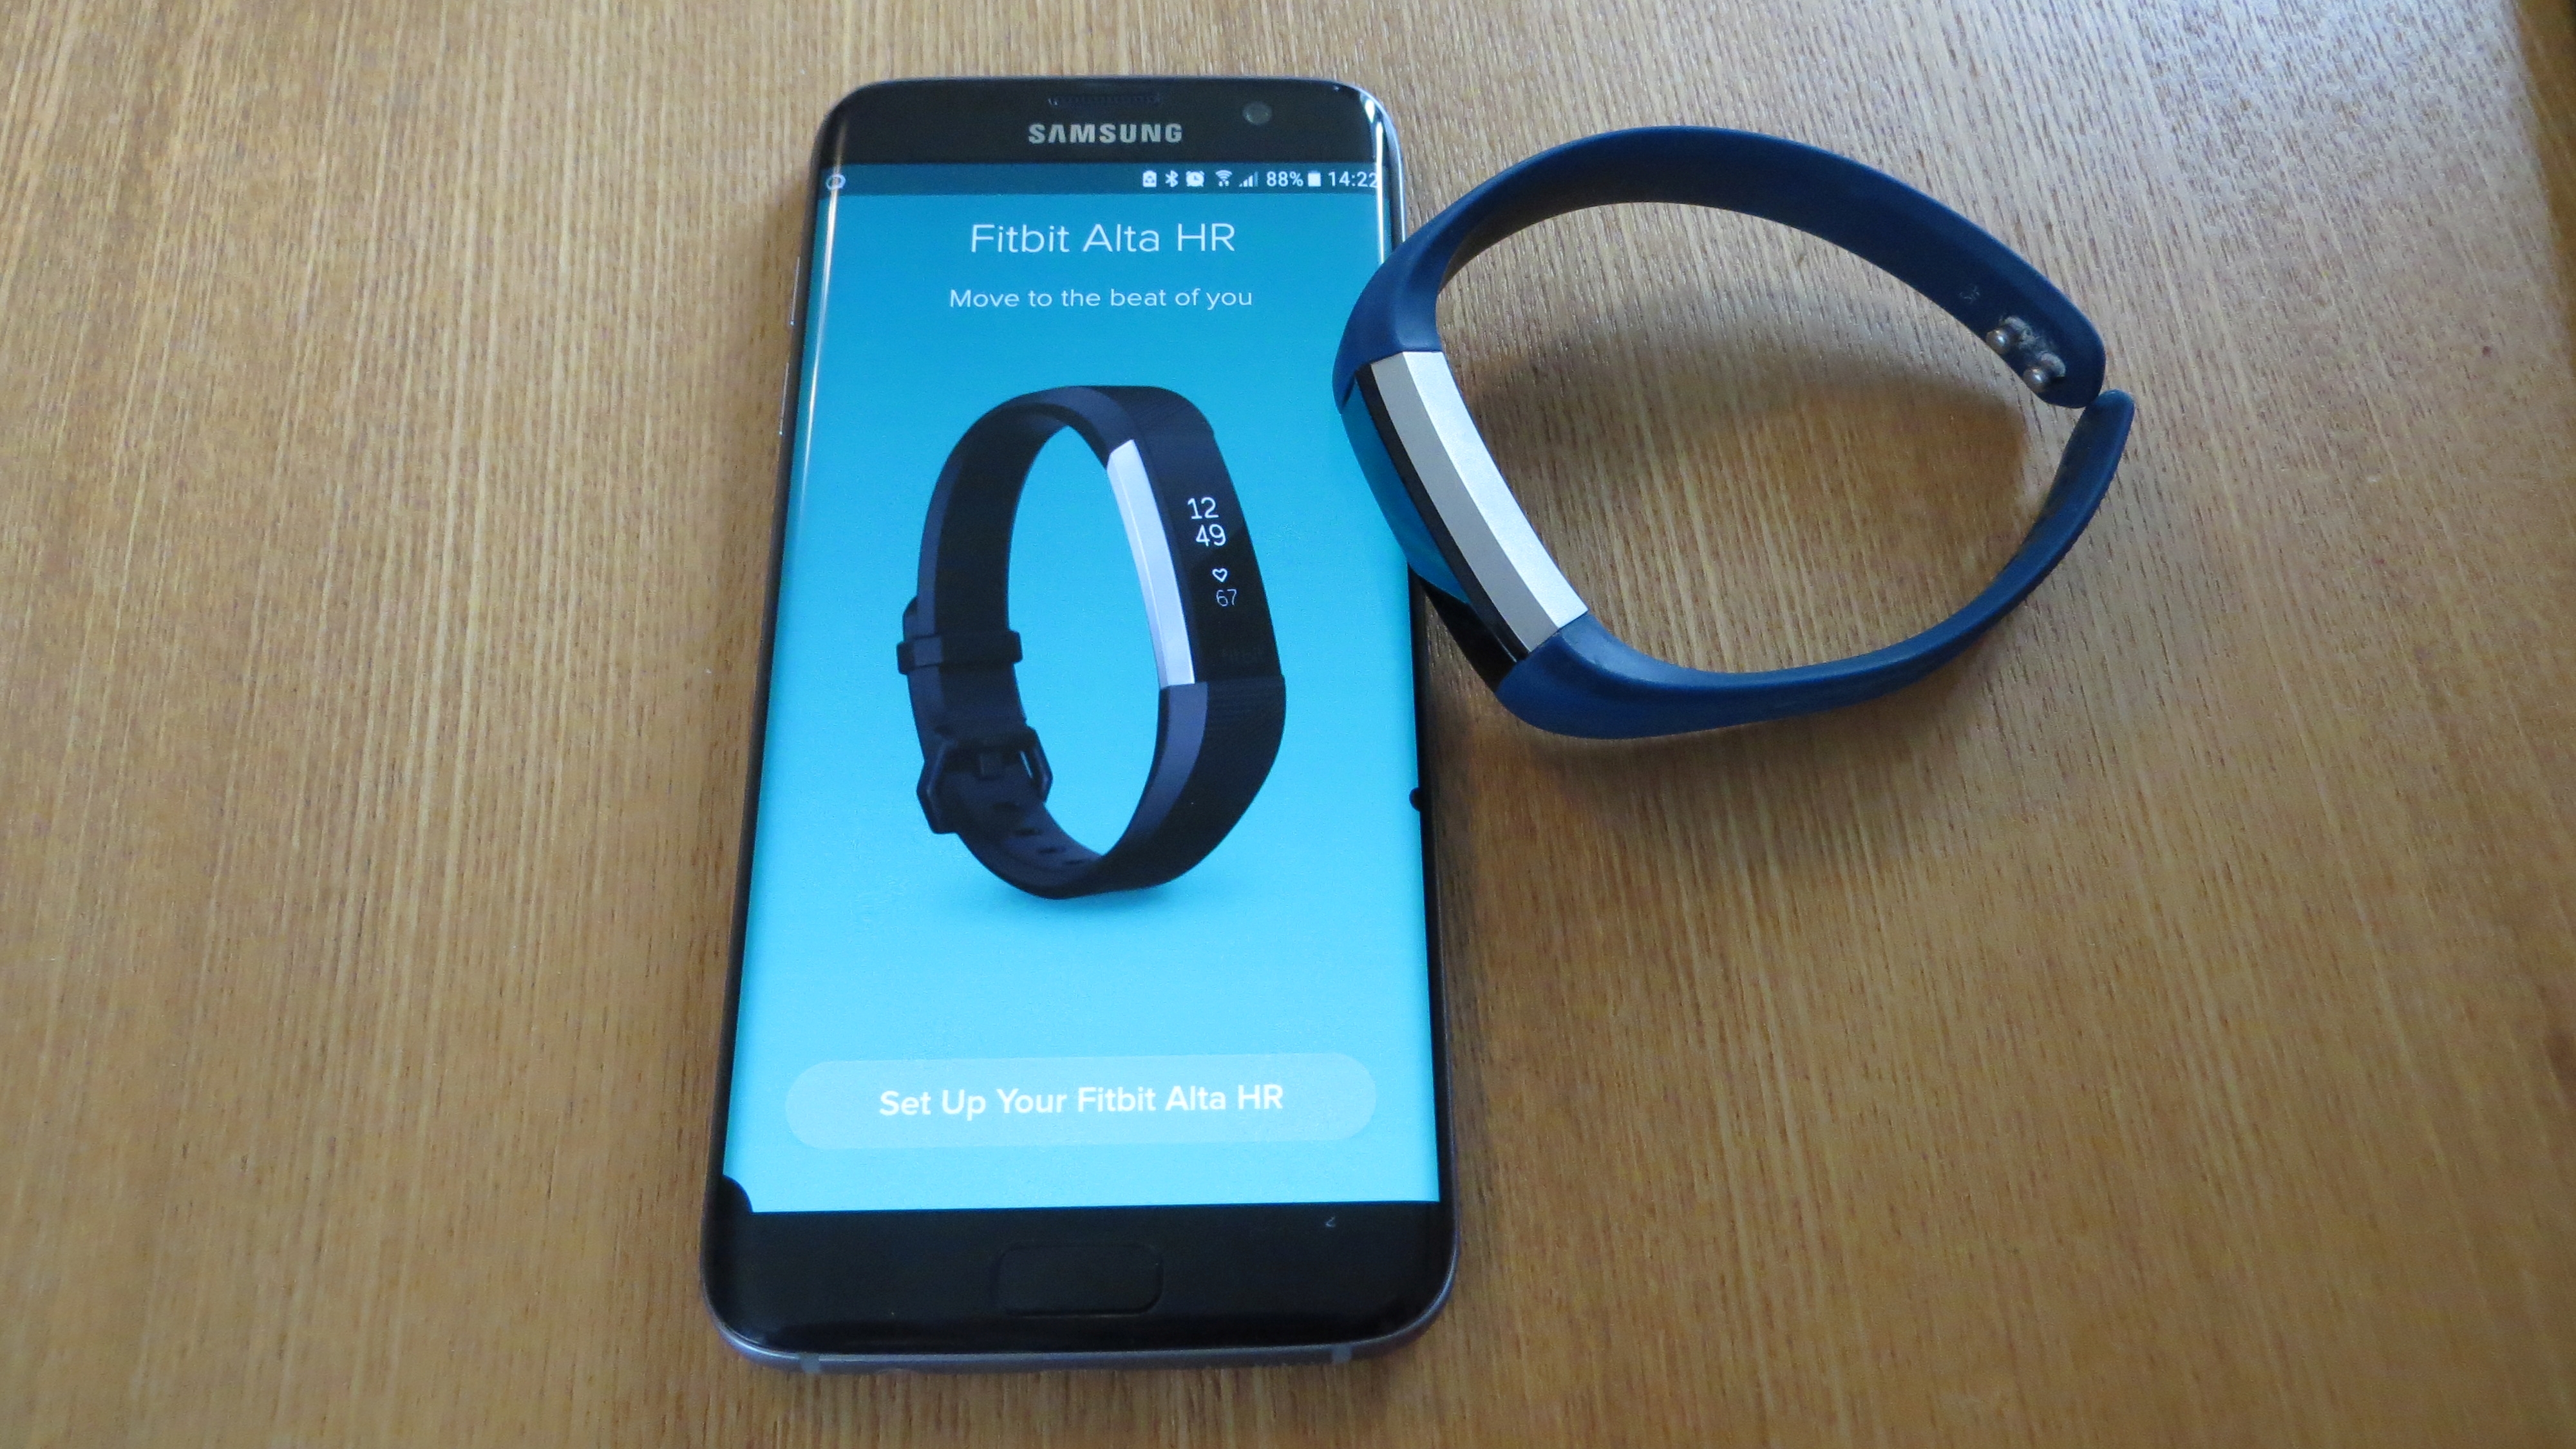 to set up your Fitbit | TechRadar